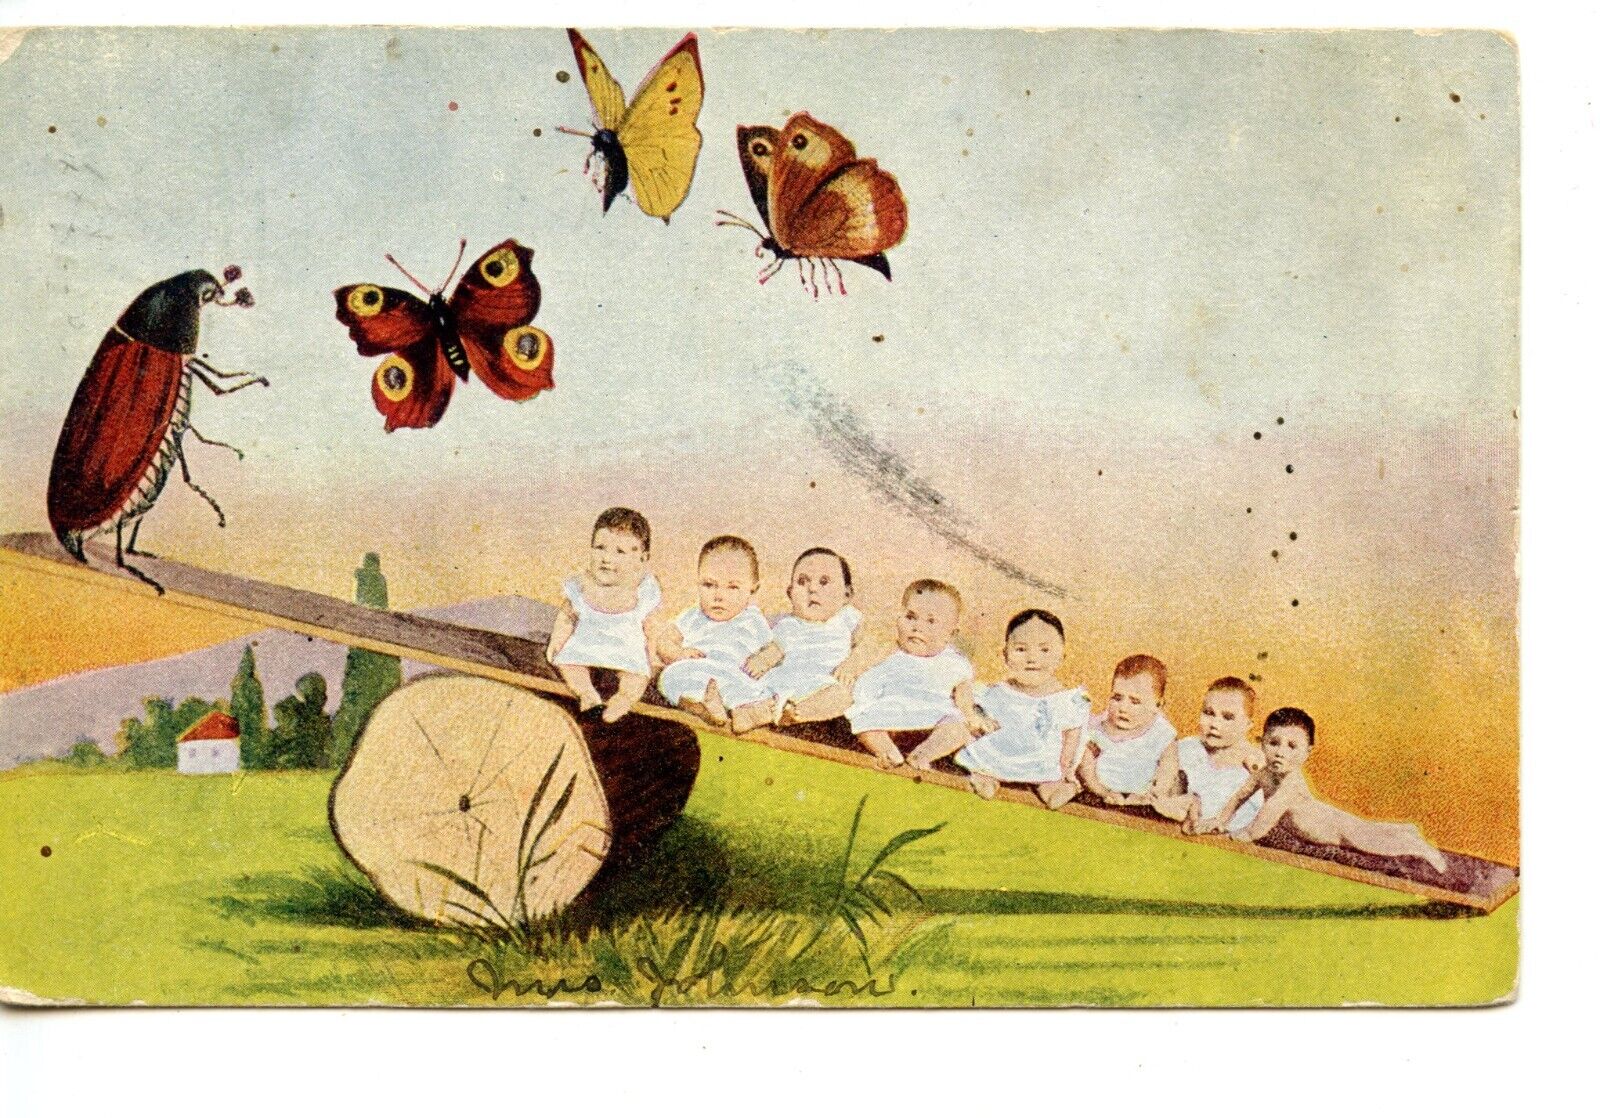 Multiple Babies on See Saw w/ Insect & Butterflies-Cute Vintage Humor Postcard